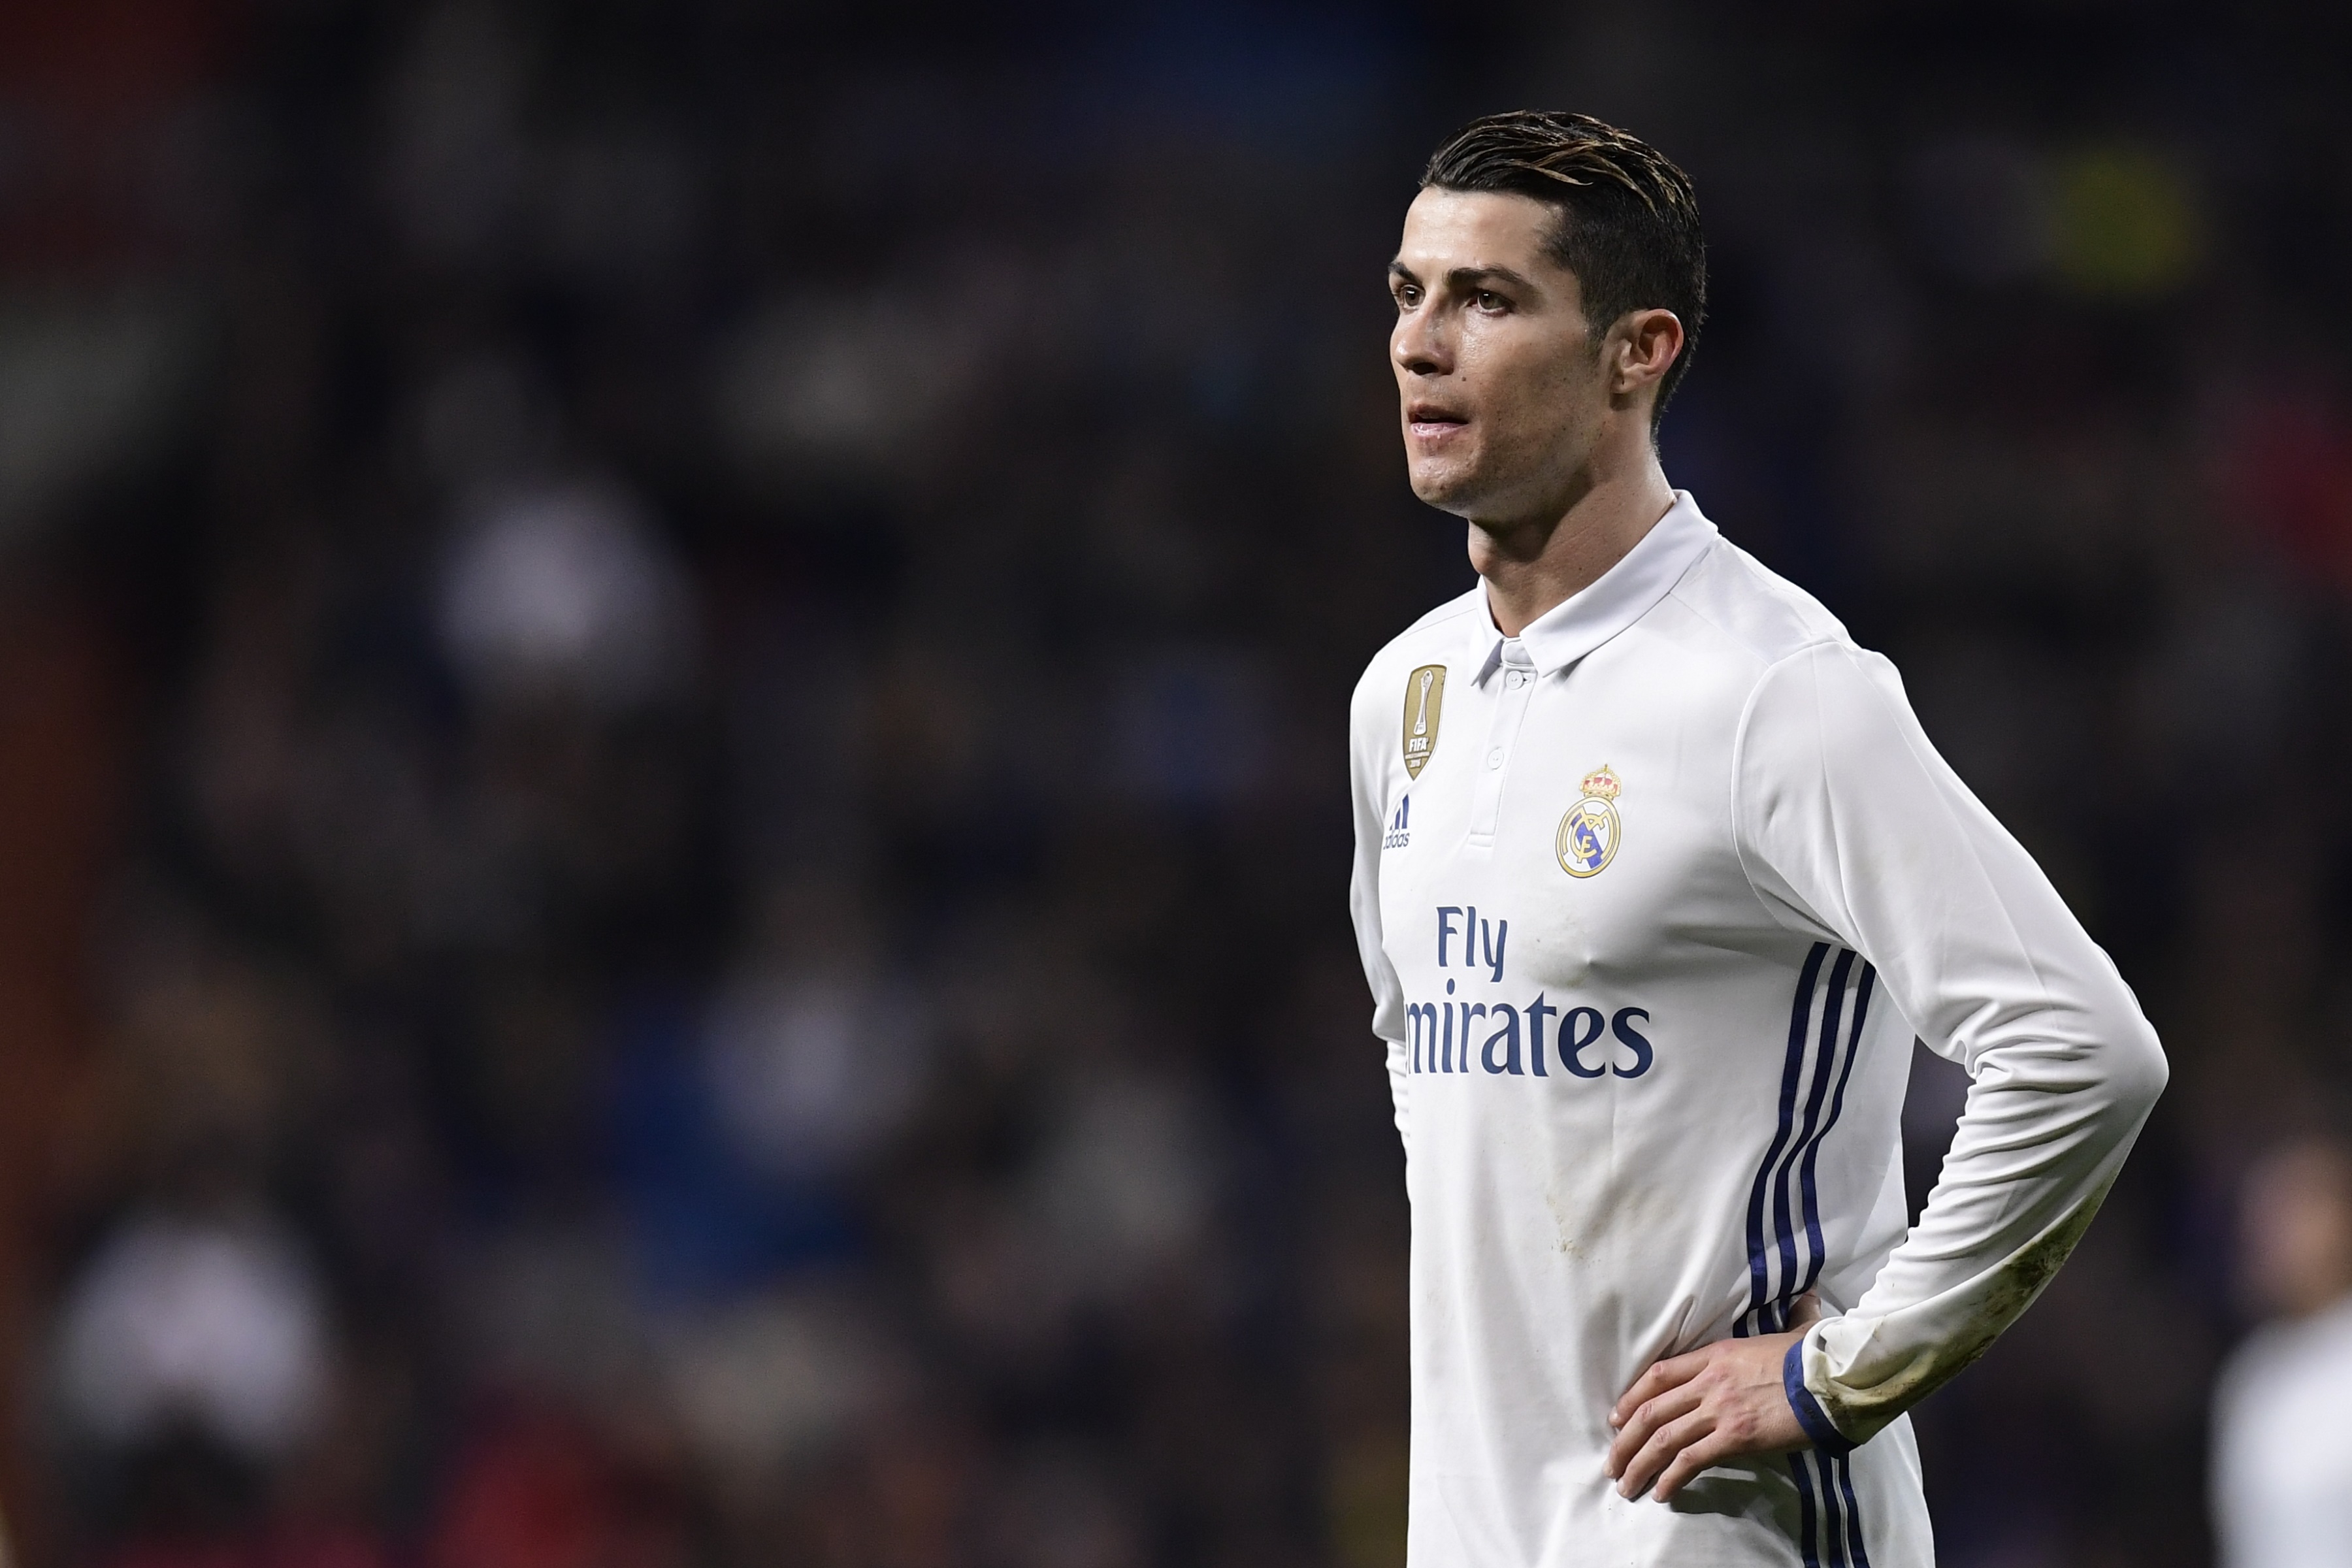 real madrid, napoli, champions league stream, real madrid stream, real madrid napoli stream , real madrid napoli live, real madrid napoli stream, online, watch, free, live, channel, app, phone, console, tablet, uefa, champions league